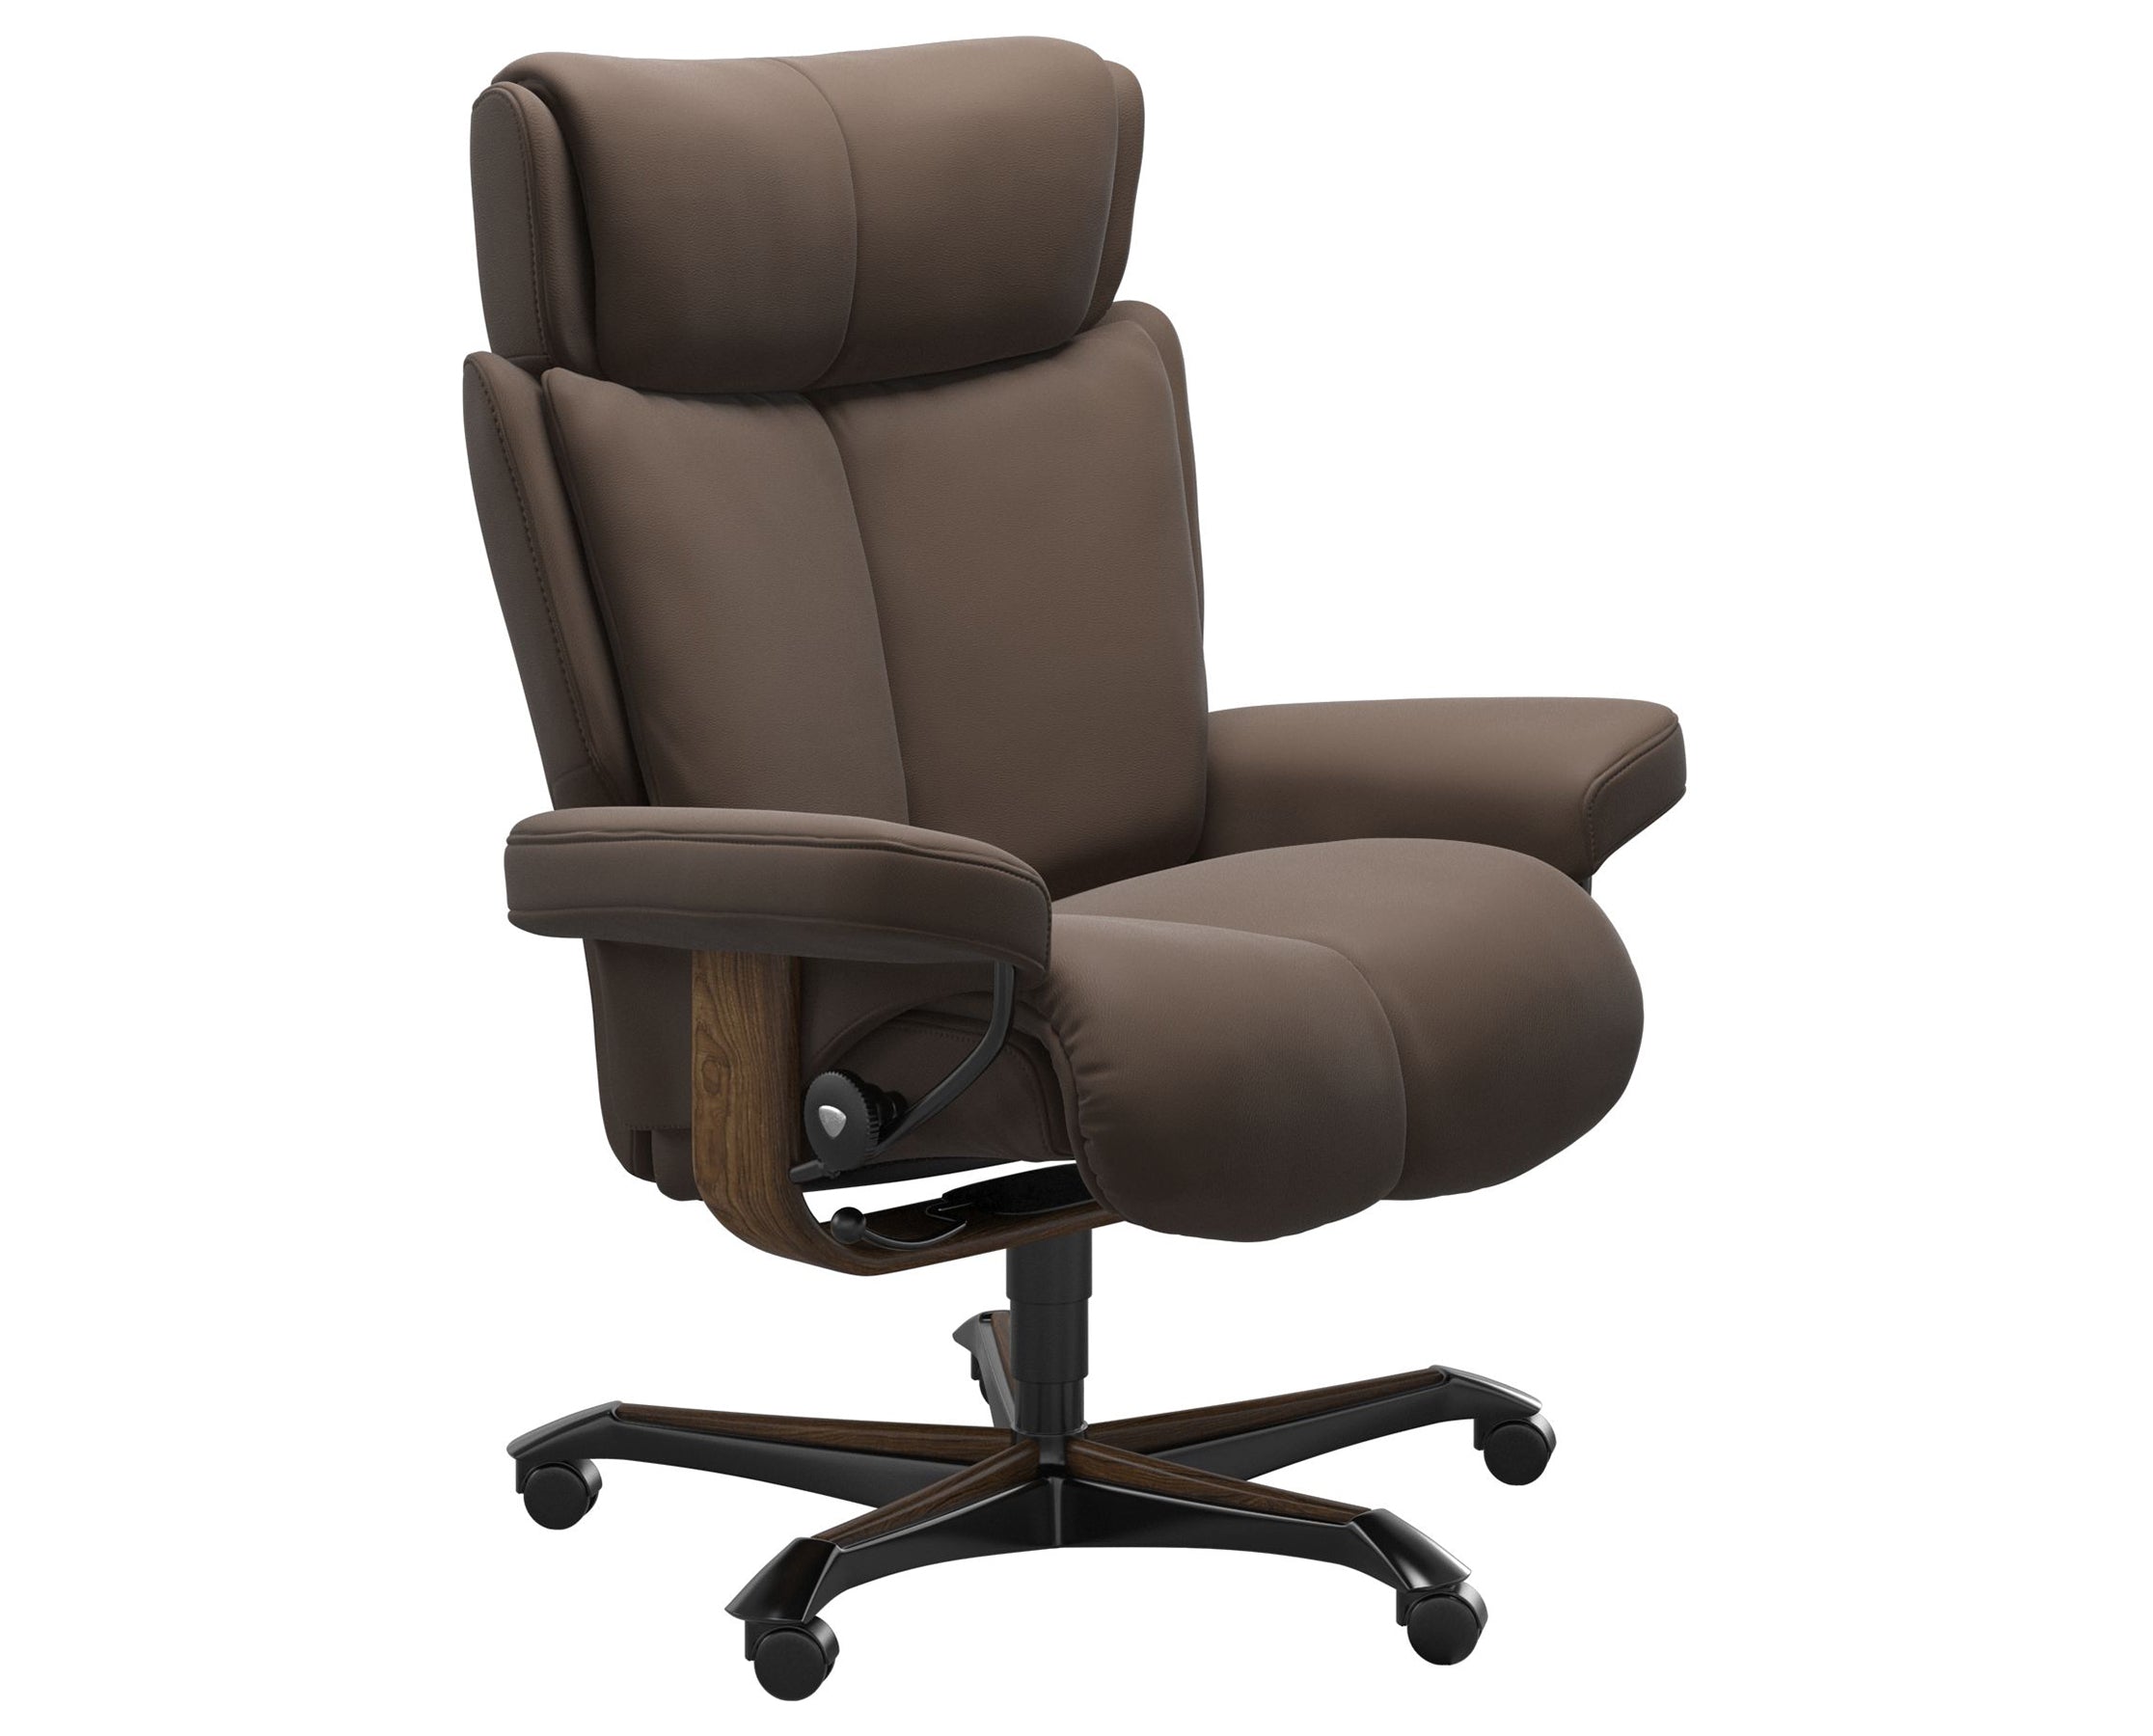 Paloma Leather Espresso M and Teak Base | Stressless Magic Home Office Chair | Valley Ridge Furniture